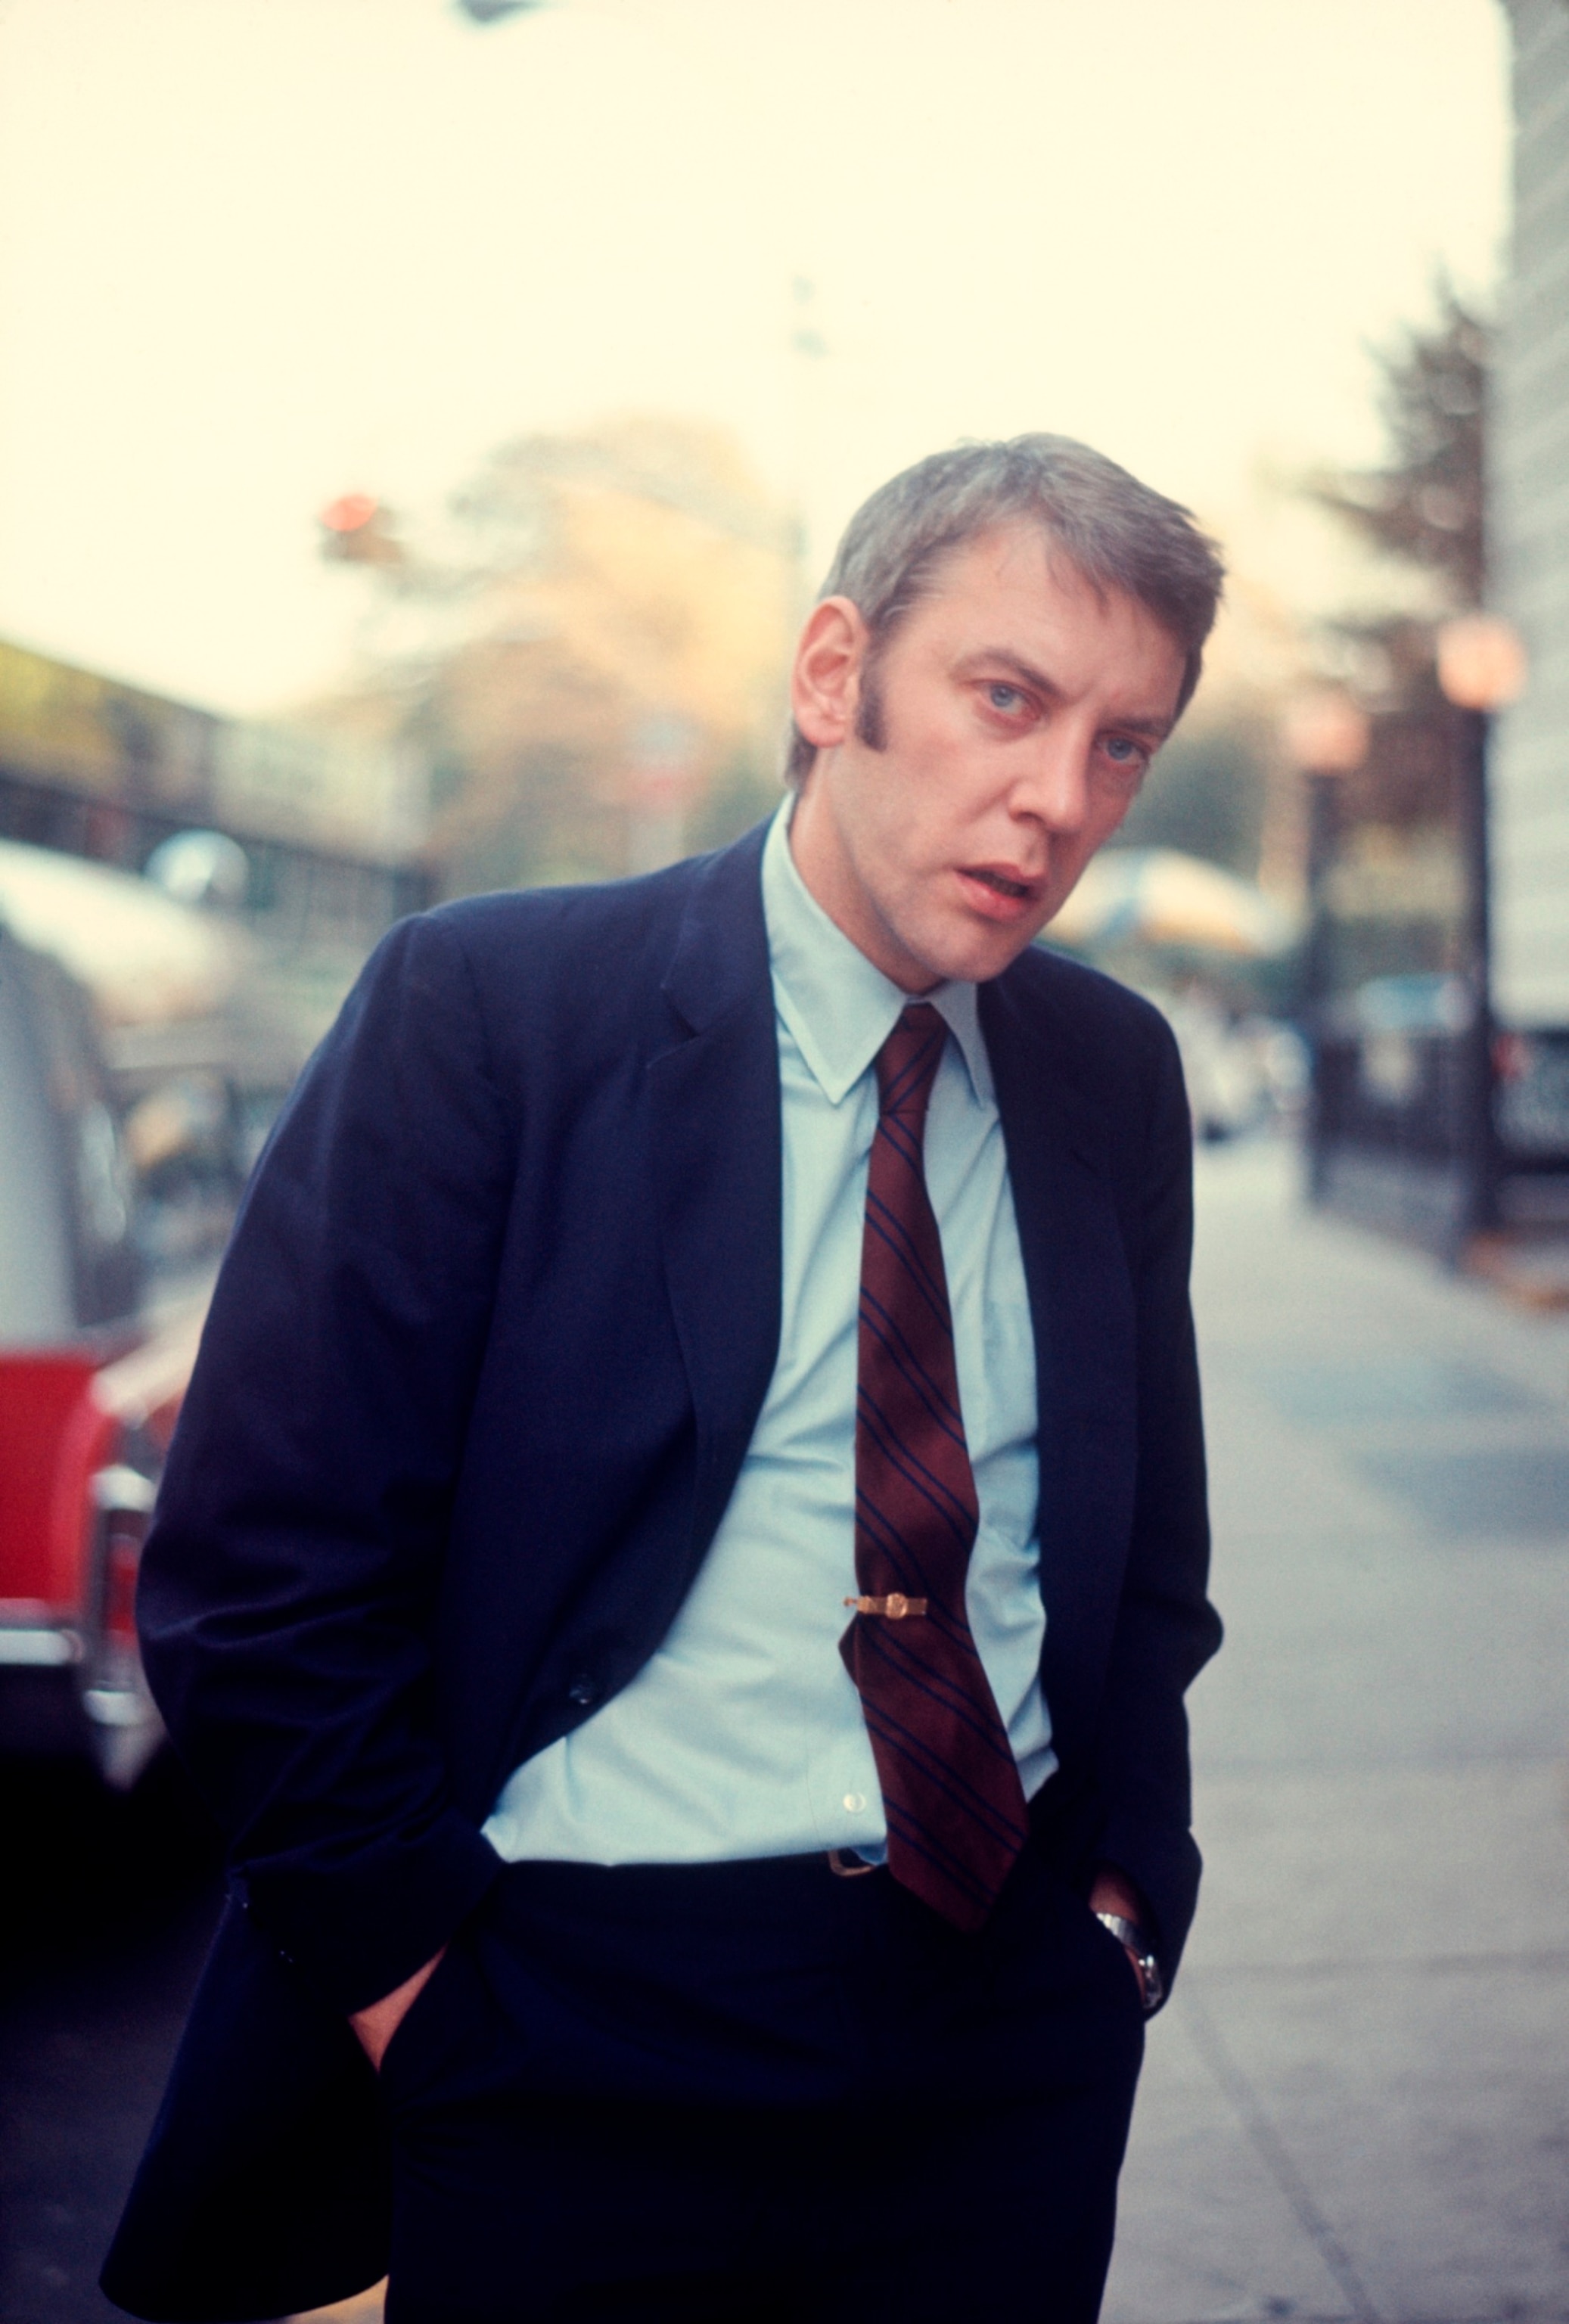 PHOTO: Donald Sutherland in a suit and tie on the street; circa 1970; New York.